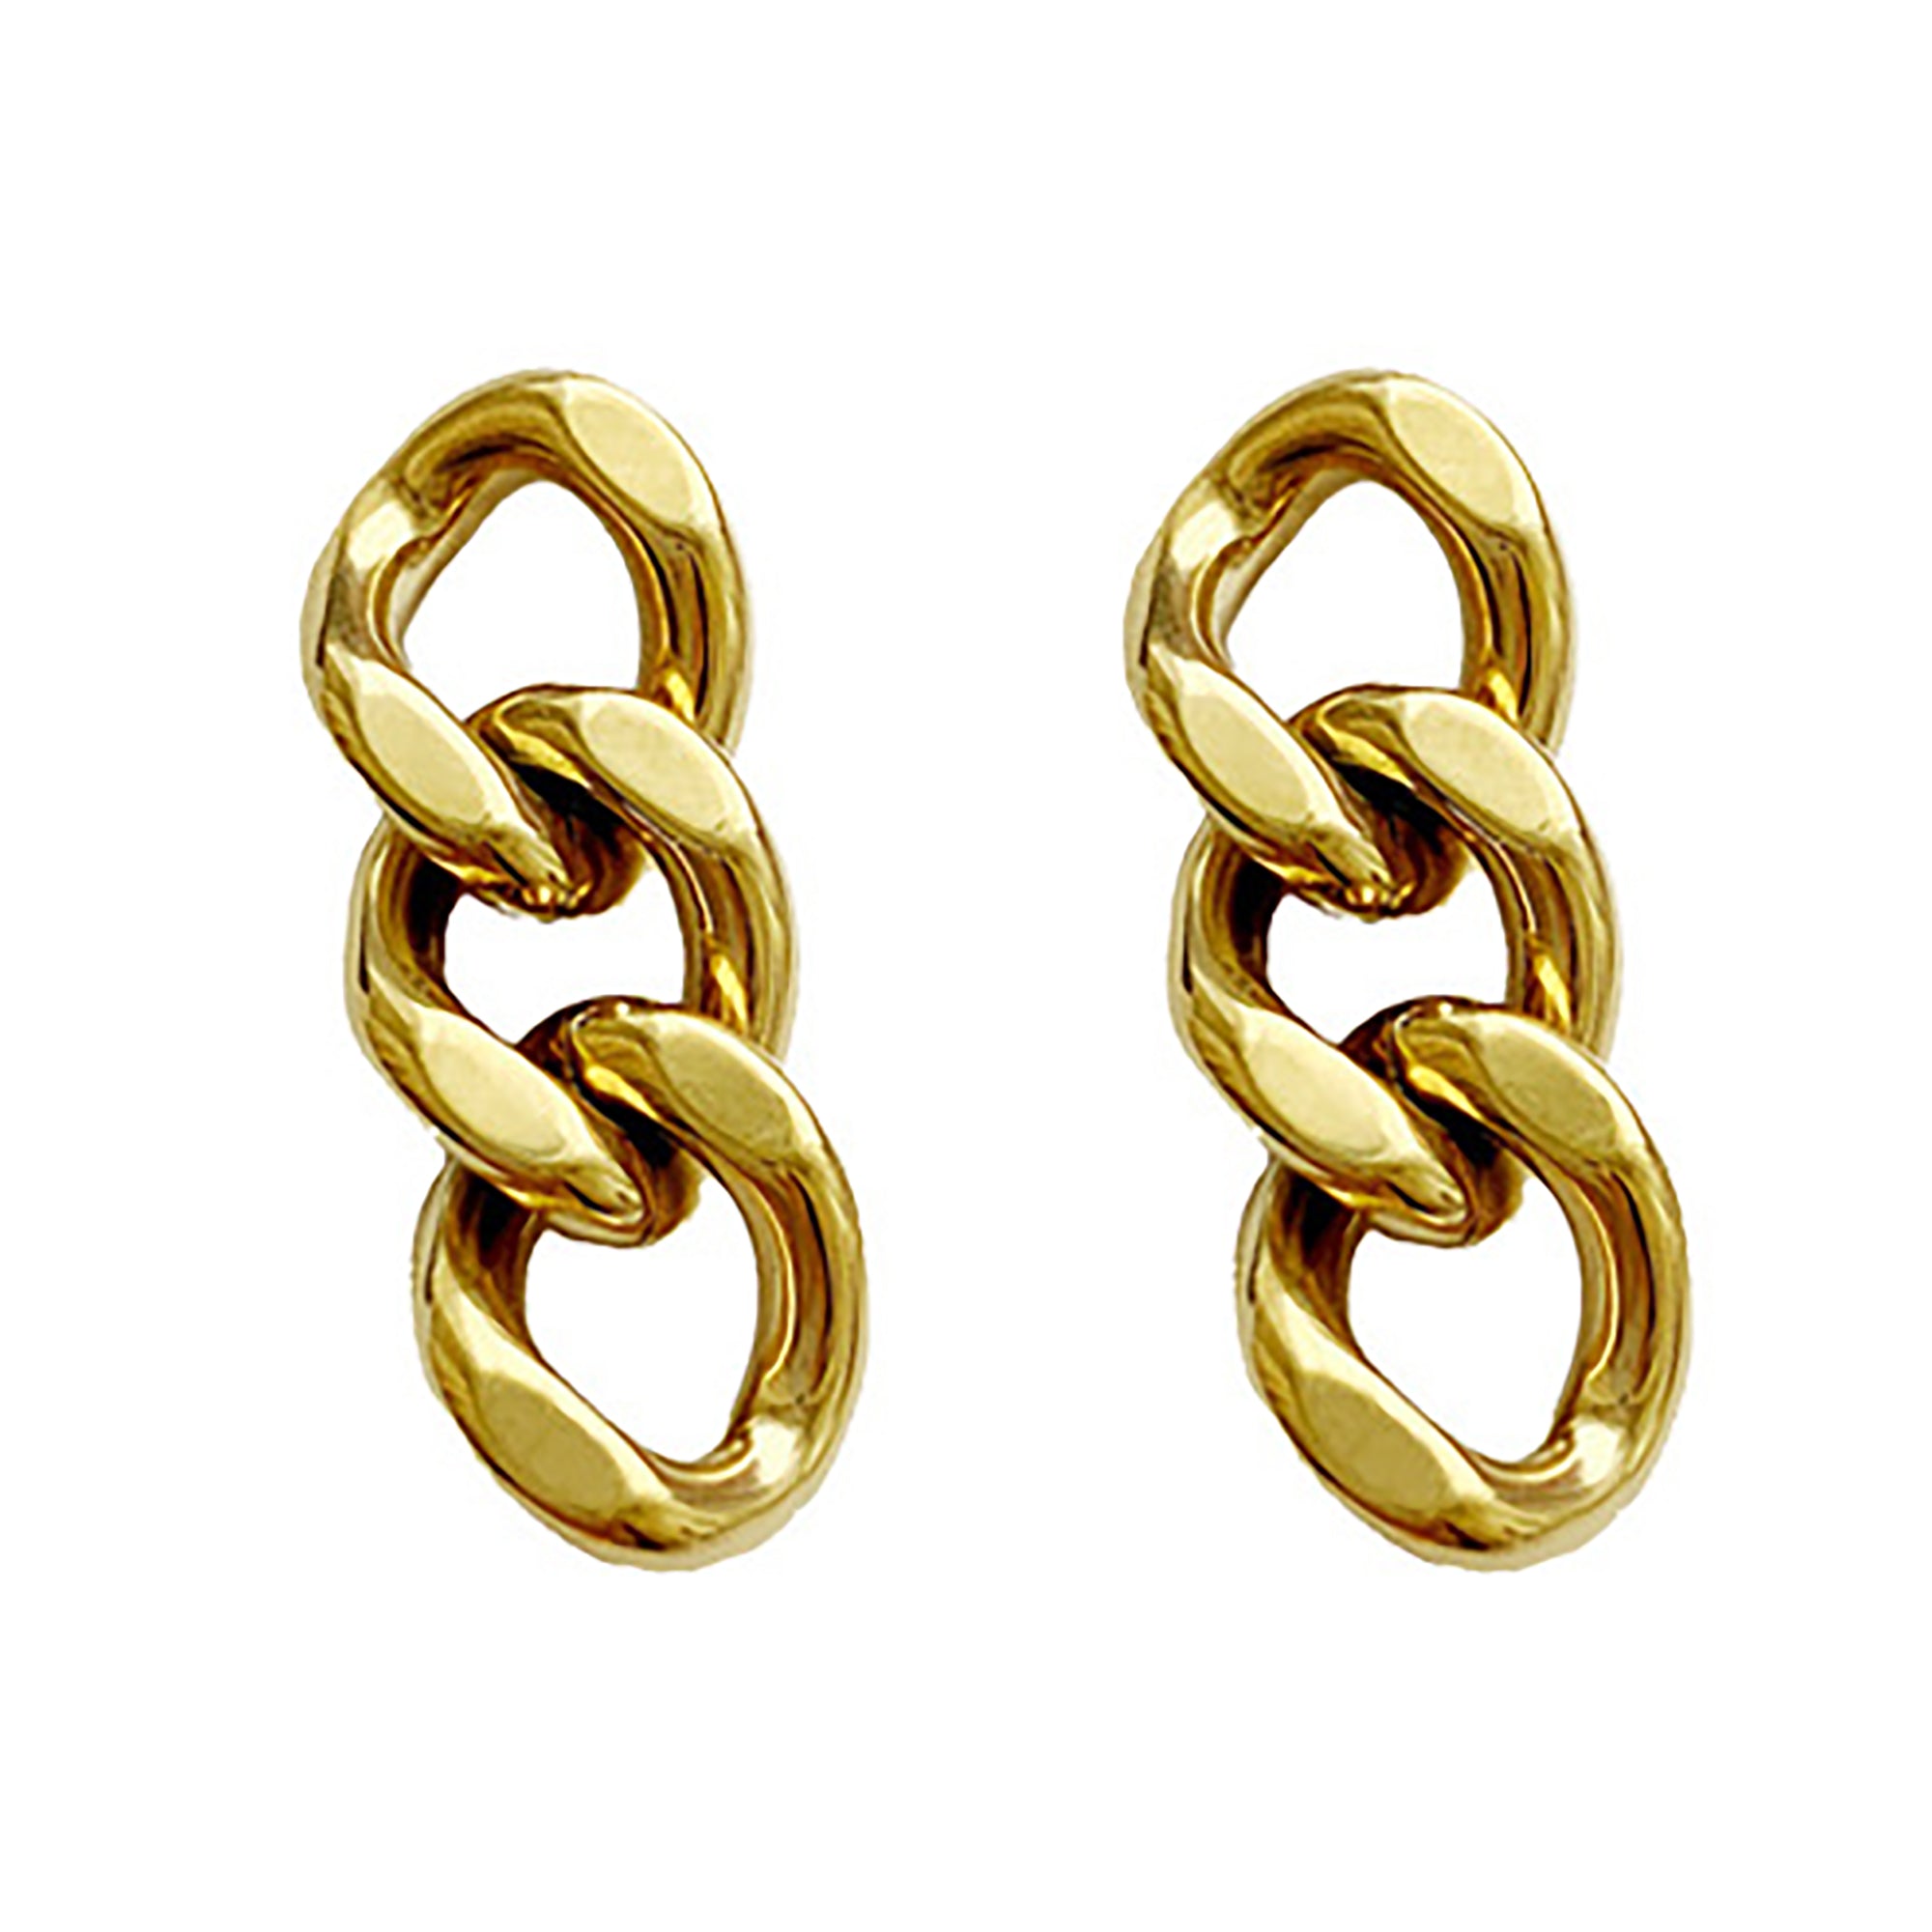 Gold Plated Metal Chain Link Earrings Valentine Day Gift Party